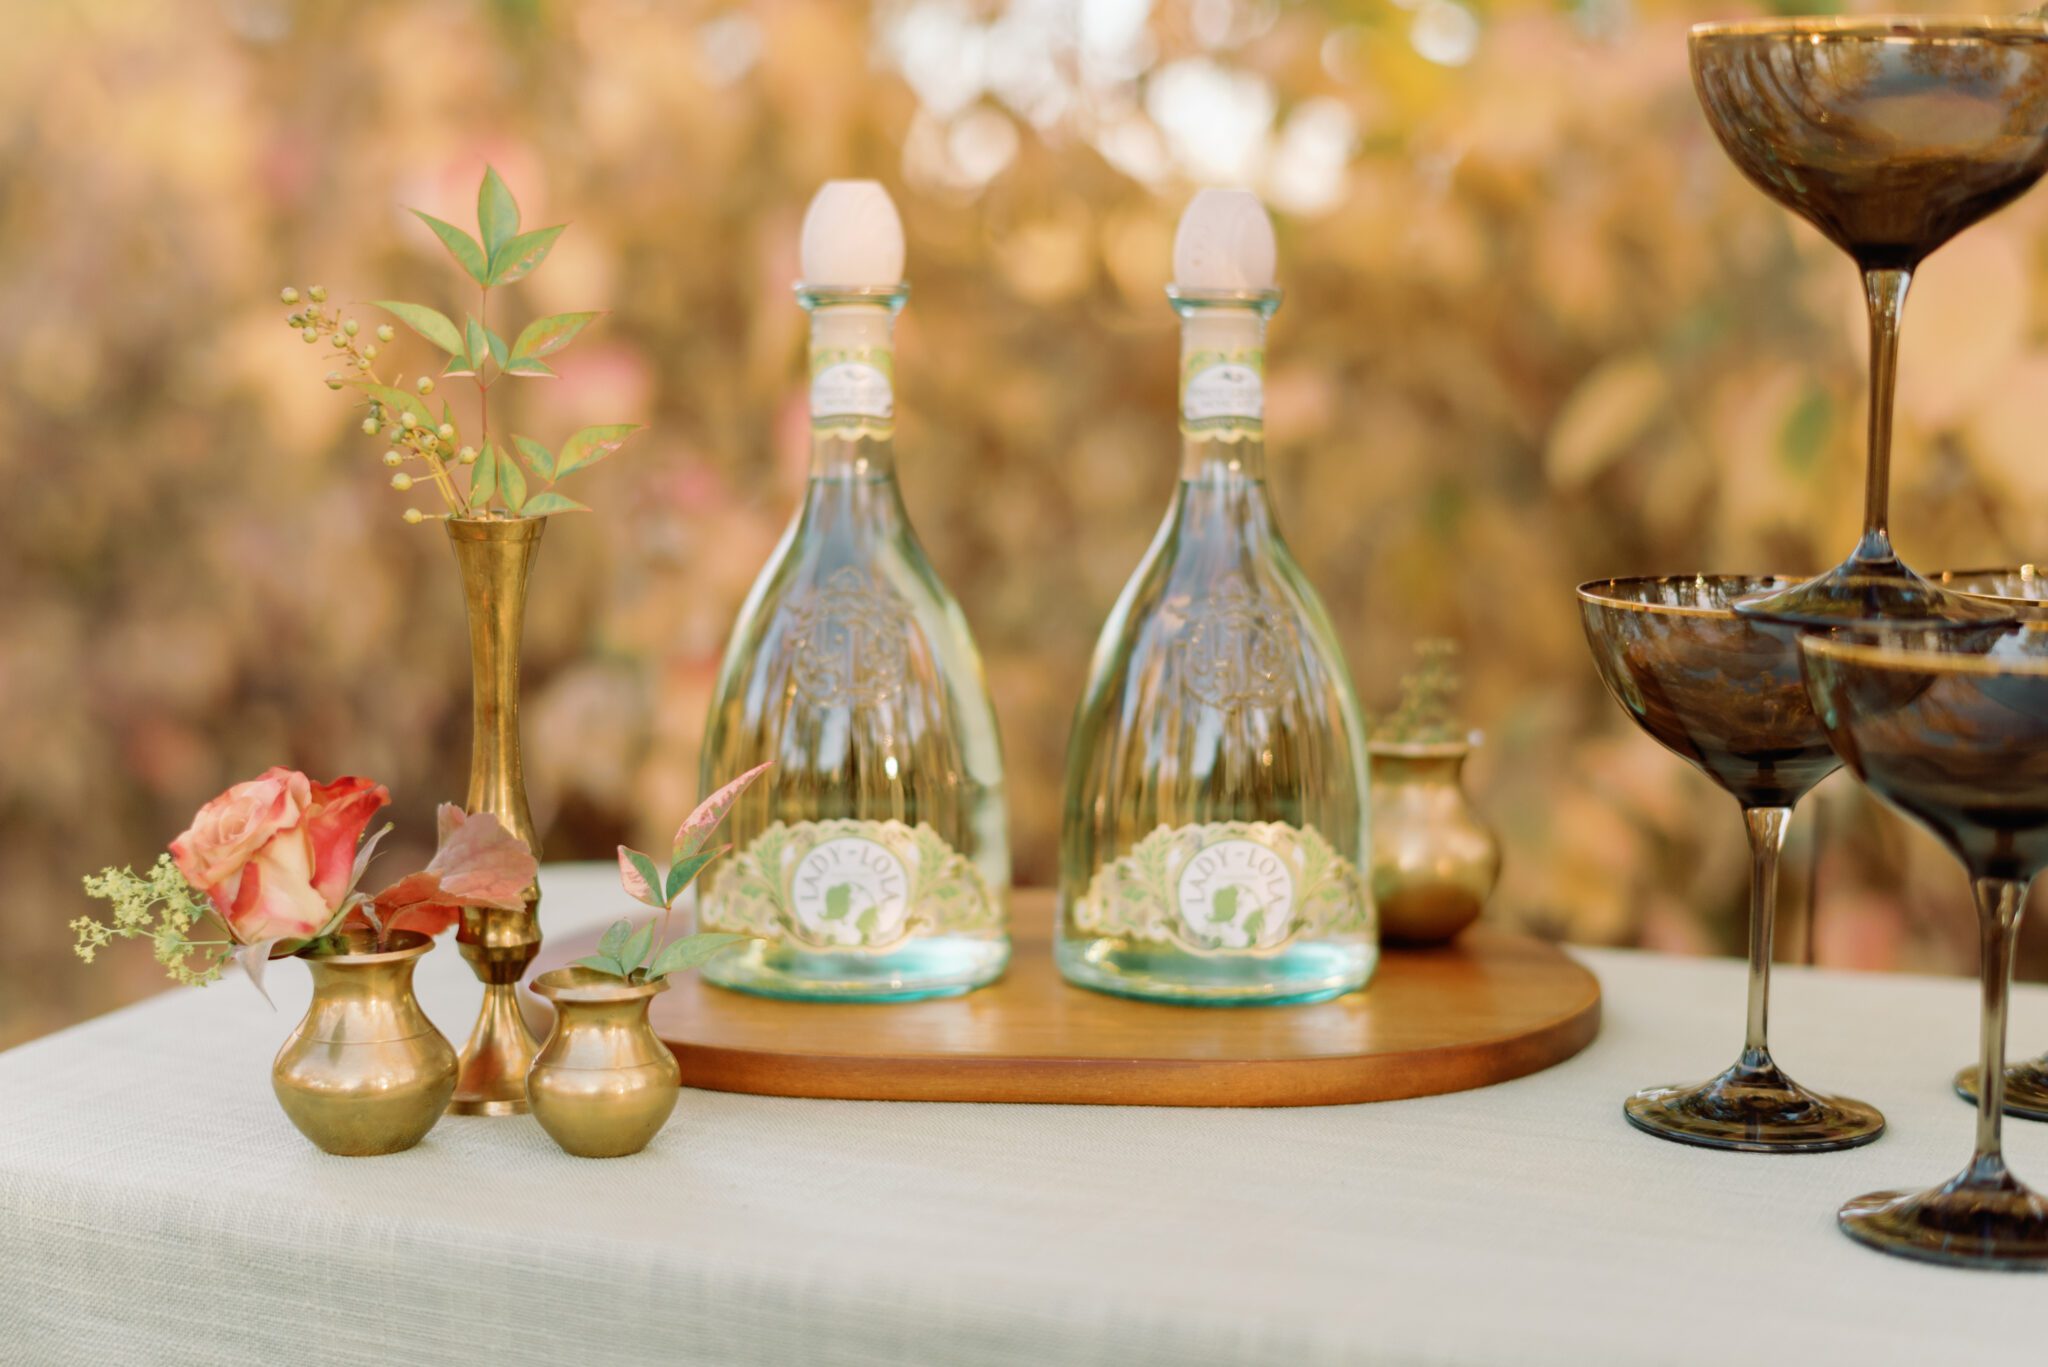 Outdoor champagne table featuring champagne bottles with uniquely elegant green-tinted glass. Al fresco dining at golden hour. Intimate autumn wedding designed and planned by Rebekah Bronte. 